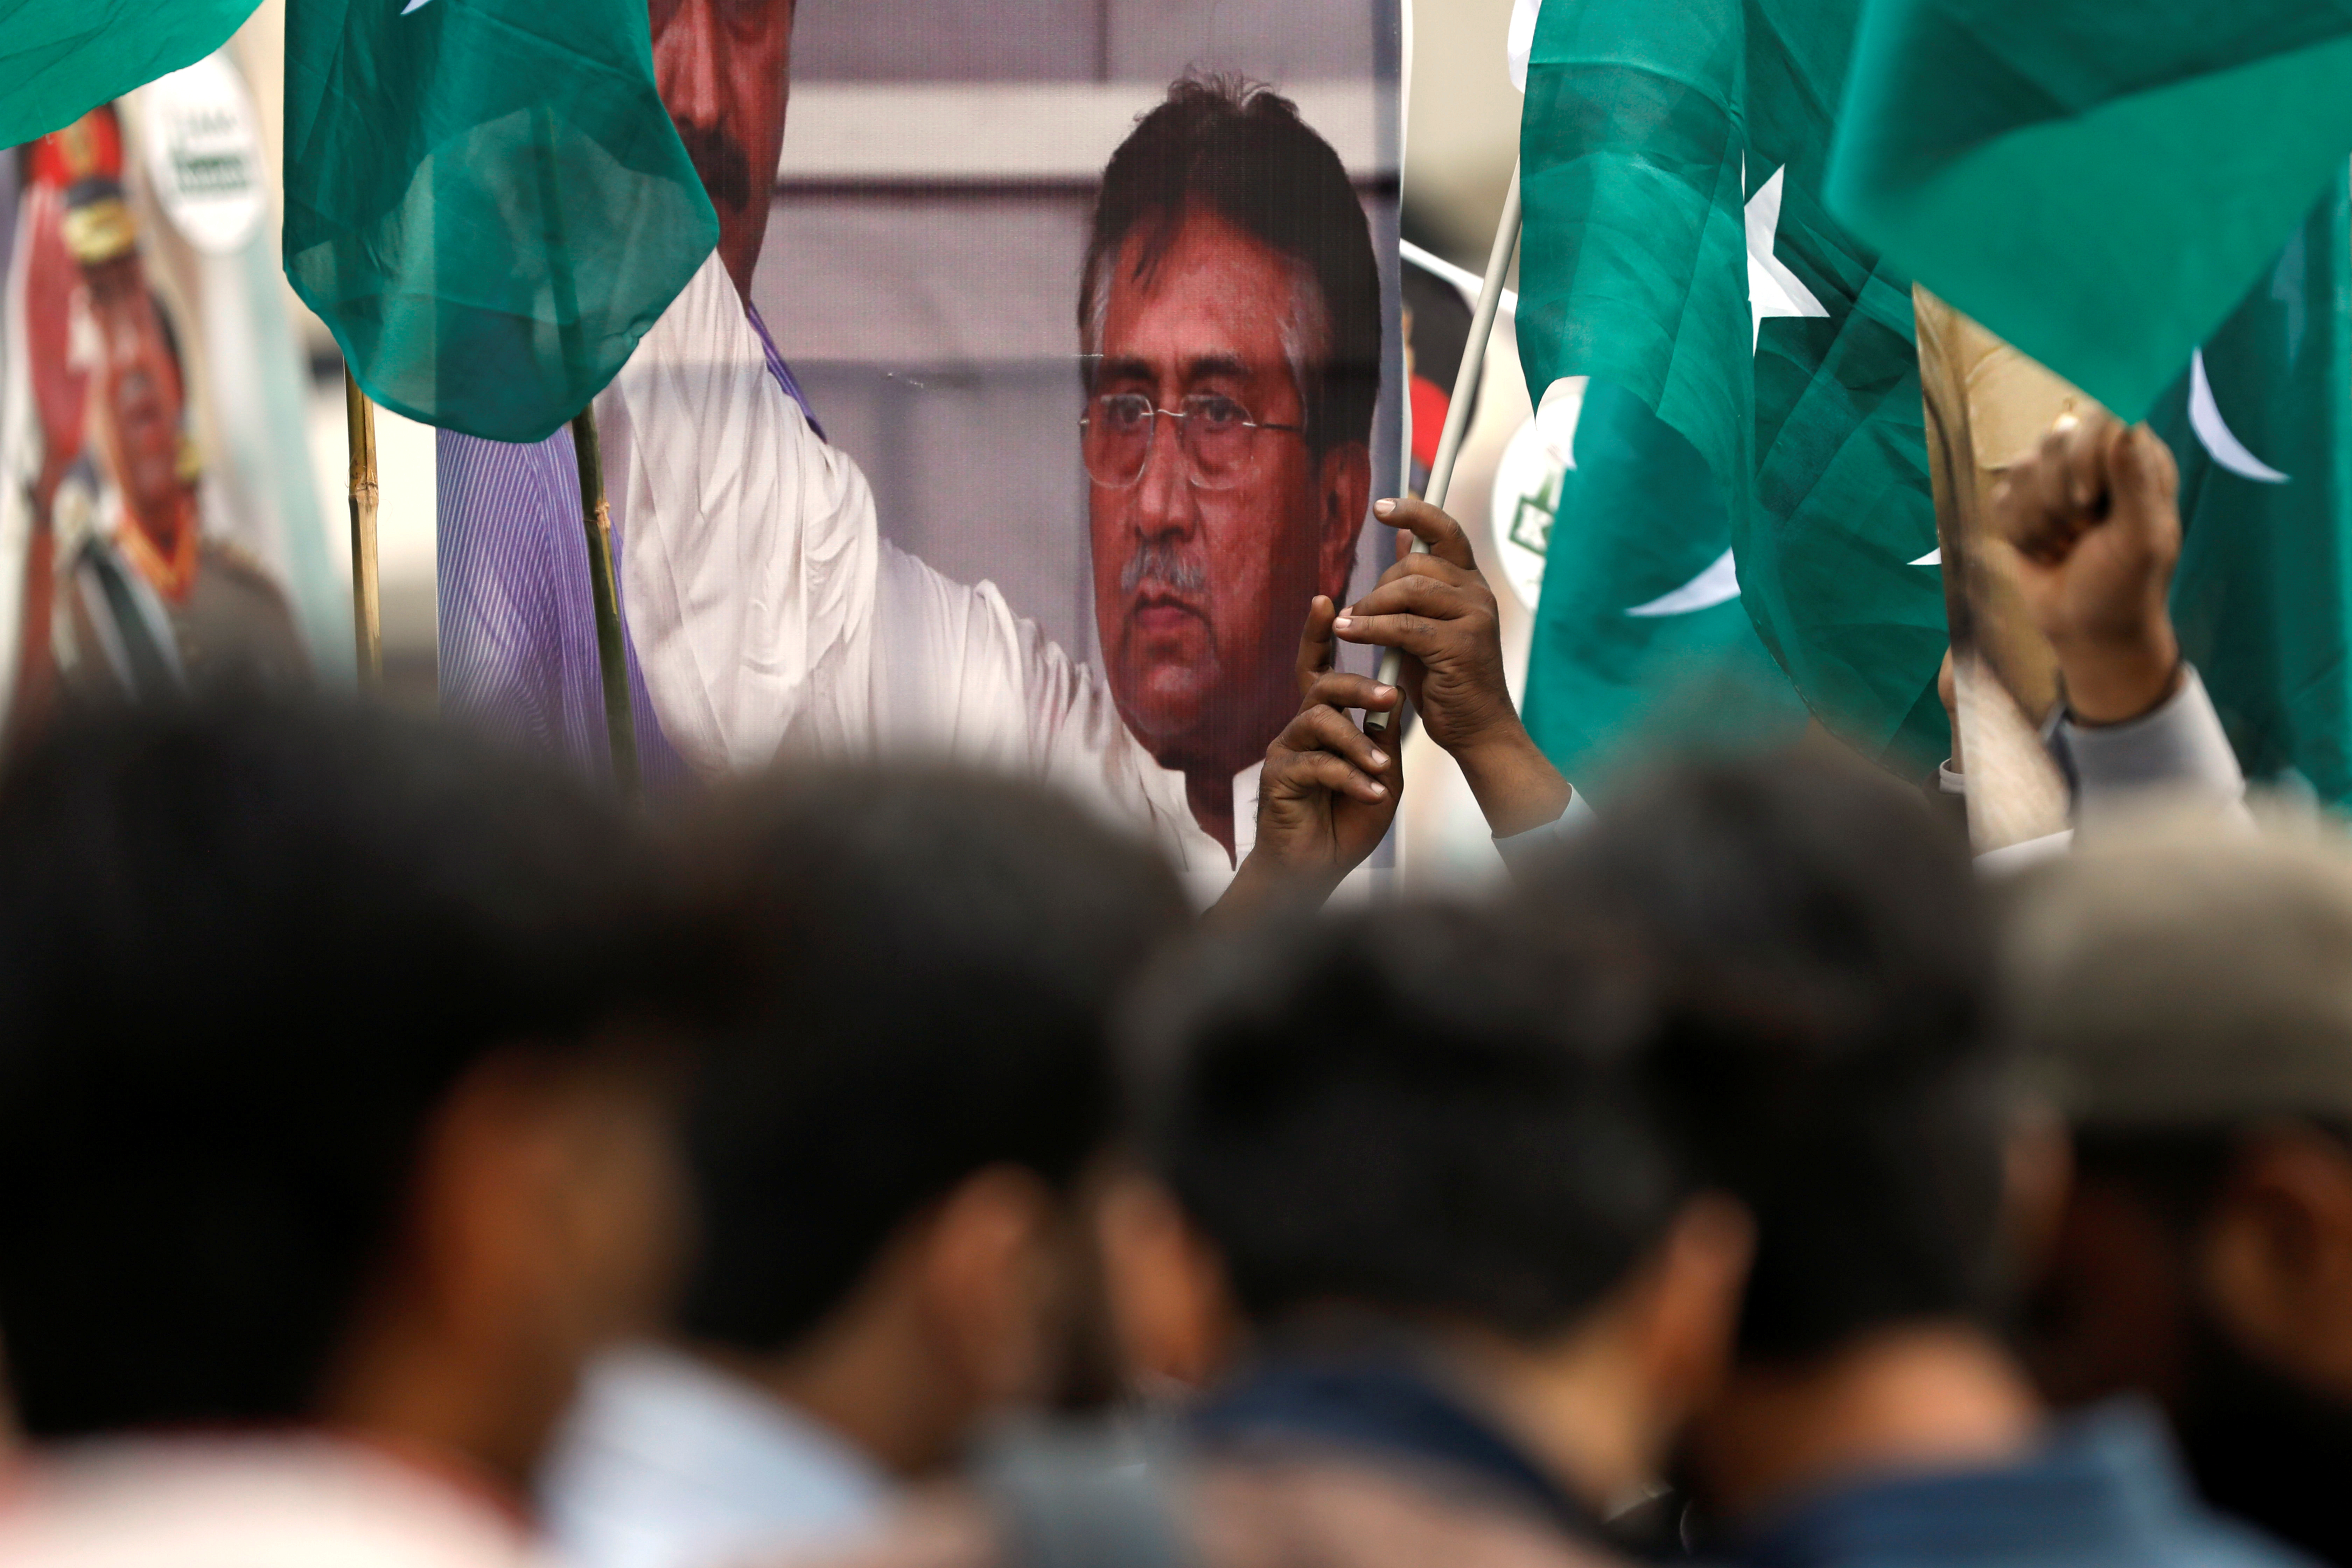 Supporters of Pervez Musharraf carry national flags and signs, after a Pakistani court sentenced the former military ruler to death on charges of high treason and subverting the constitution, during a protest in Karachi,